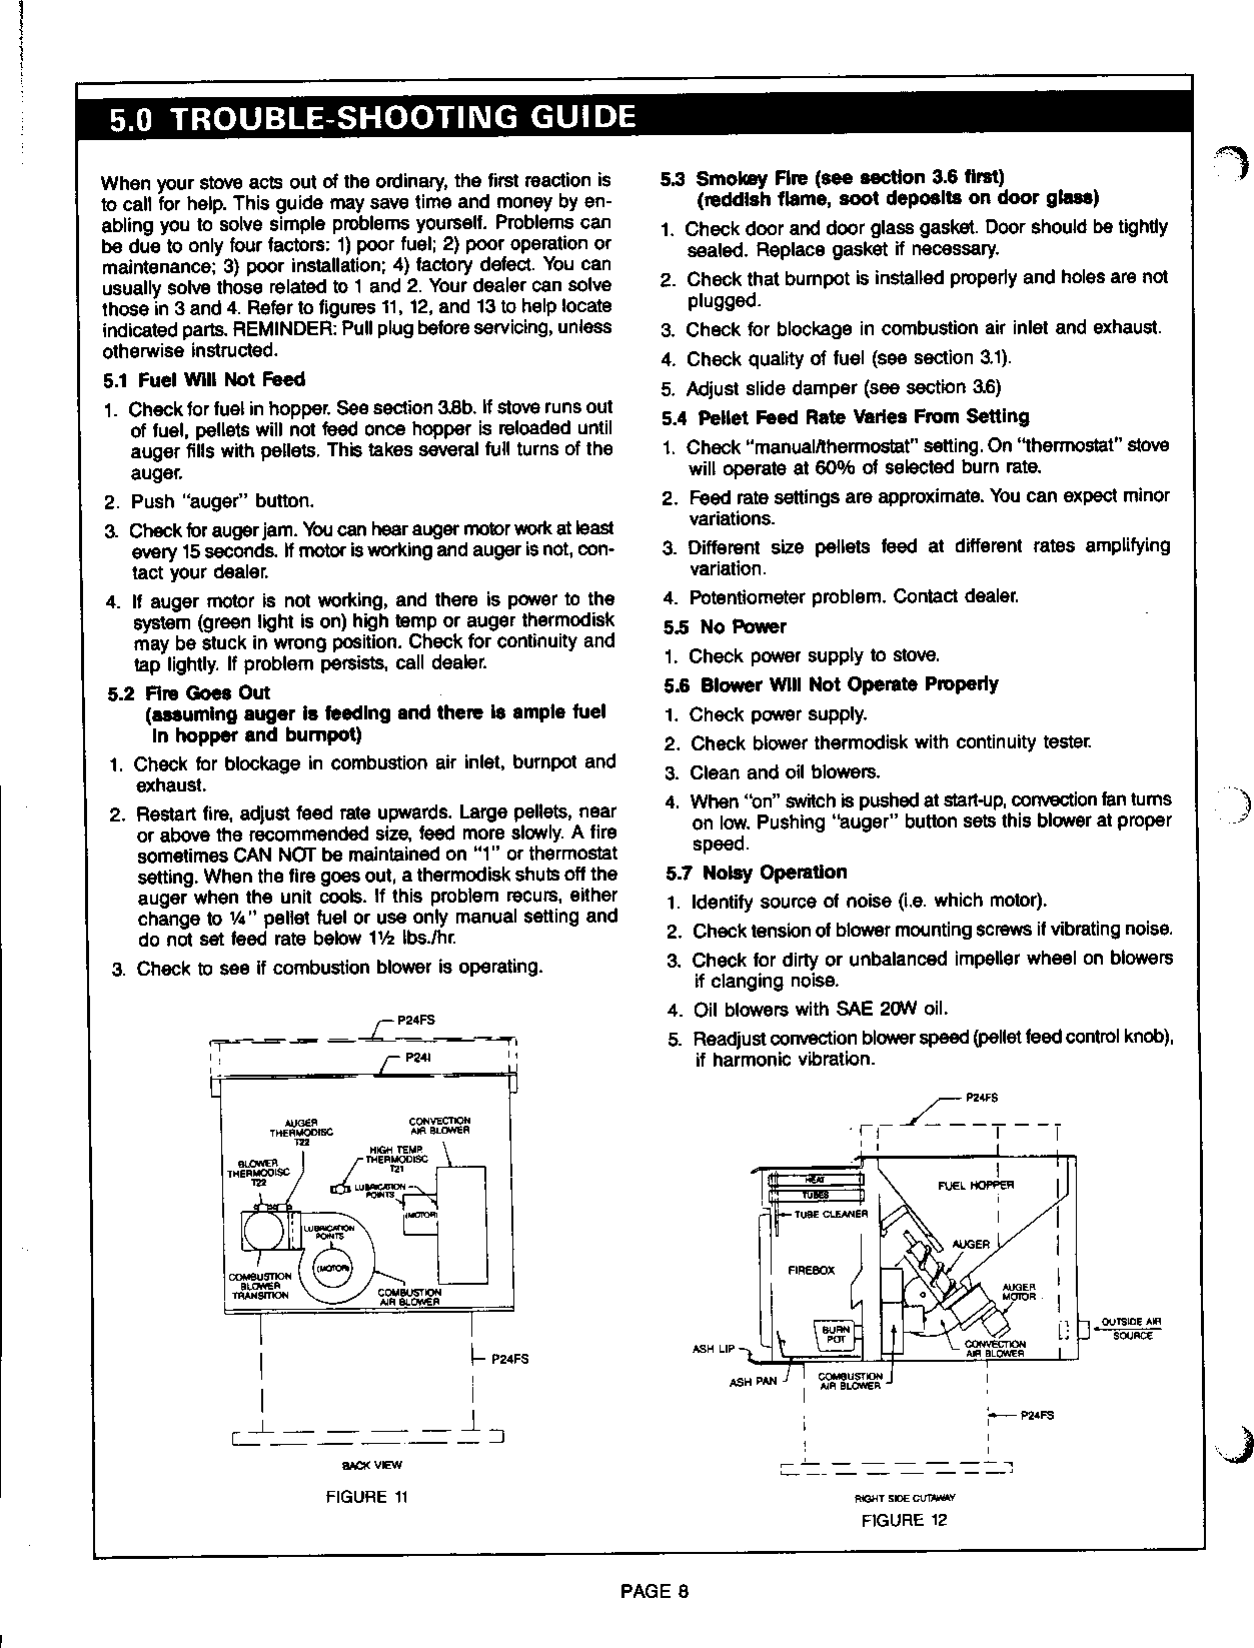 Page 8 of 9 - Breckwell Breckwell-1991-s-P24Fs-Users-Manual- P24 Blazer Pellet Stove Owner's Manual  Breckwell-1991-s-p24fs-users-manual